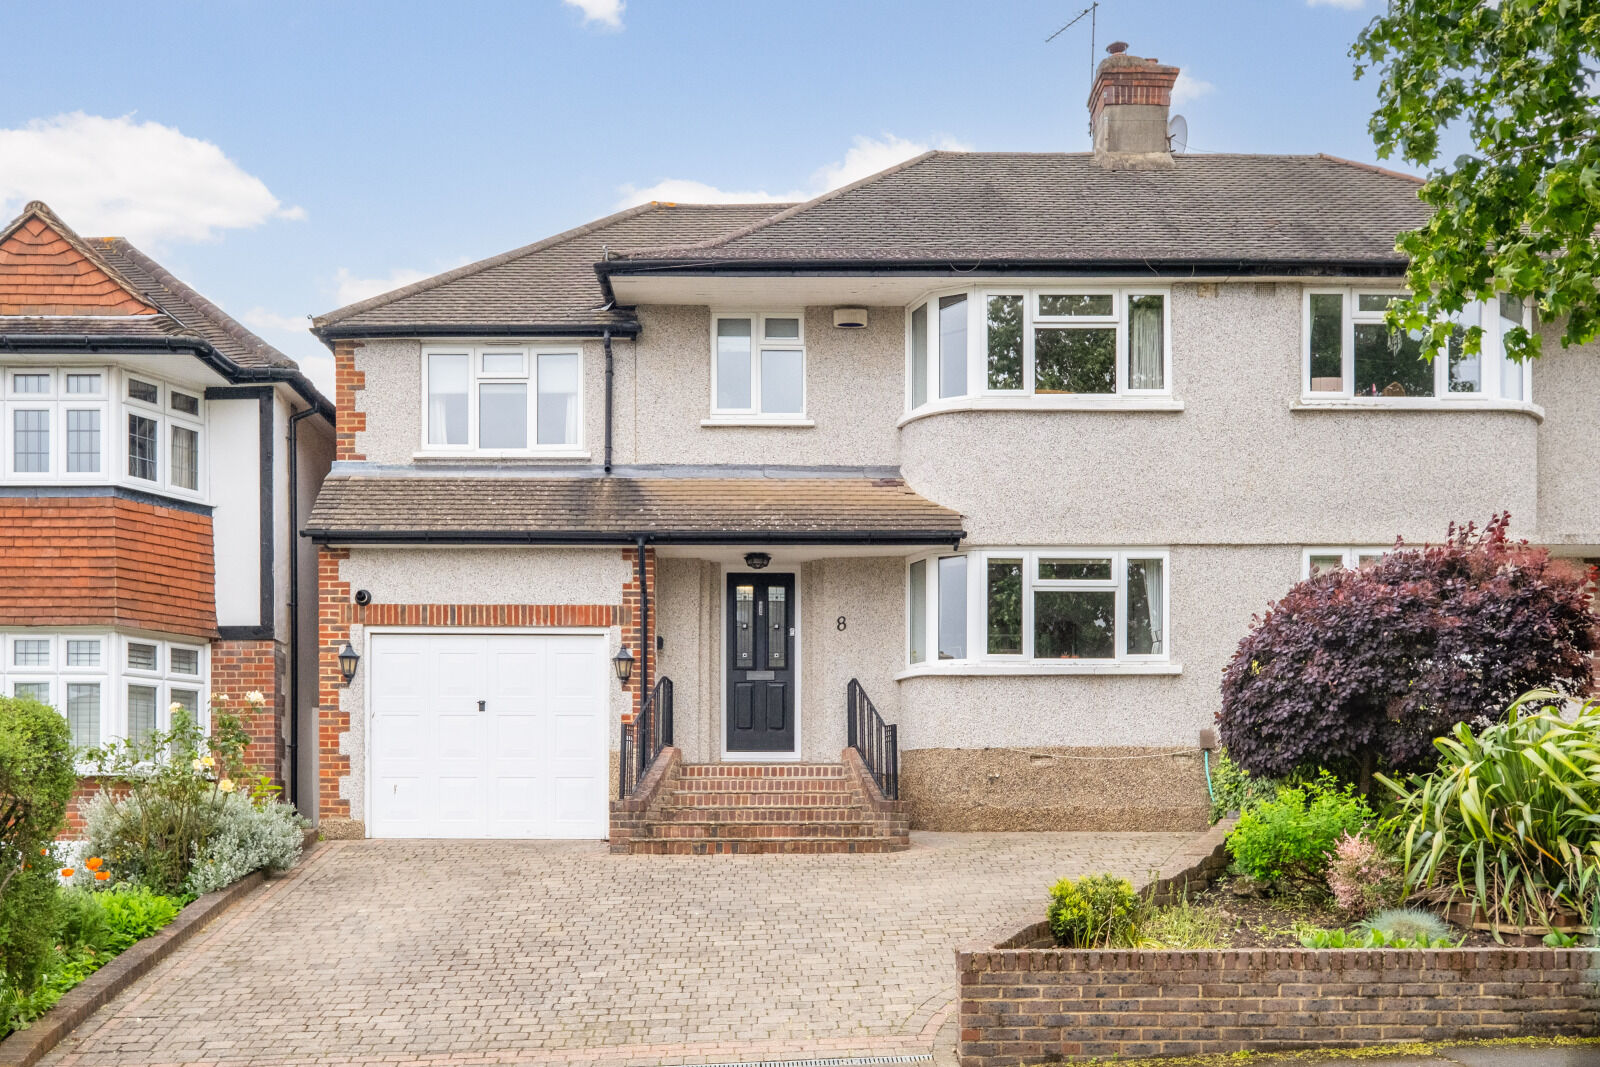 5 bedroom semi detached house for sale Fairholme Road, Cheam, SM1, main image